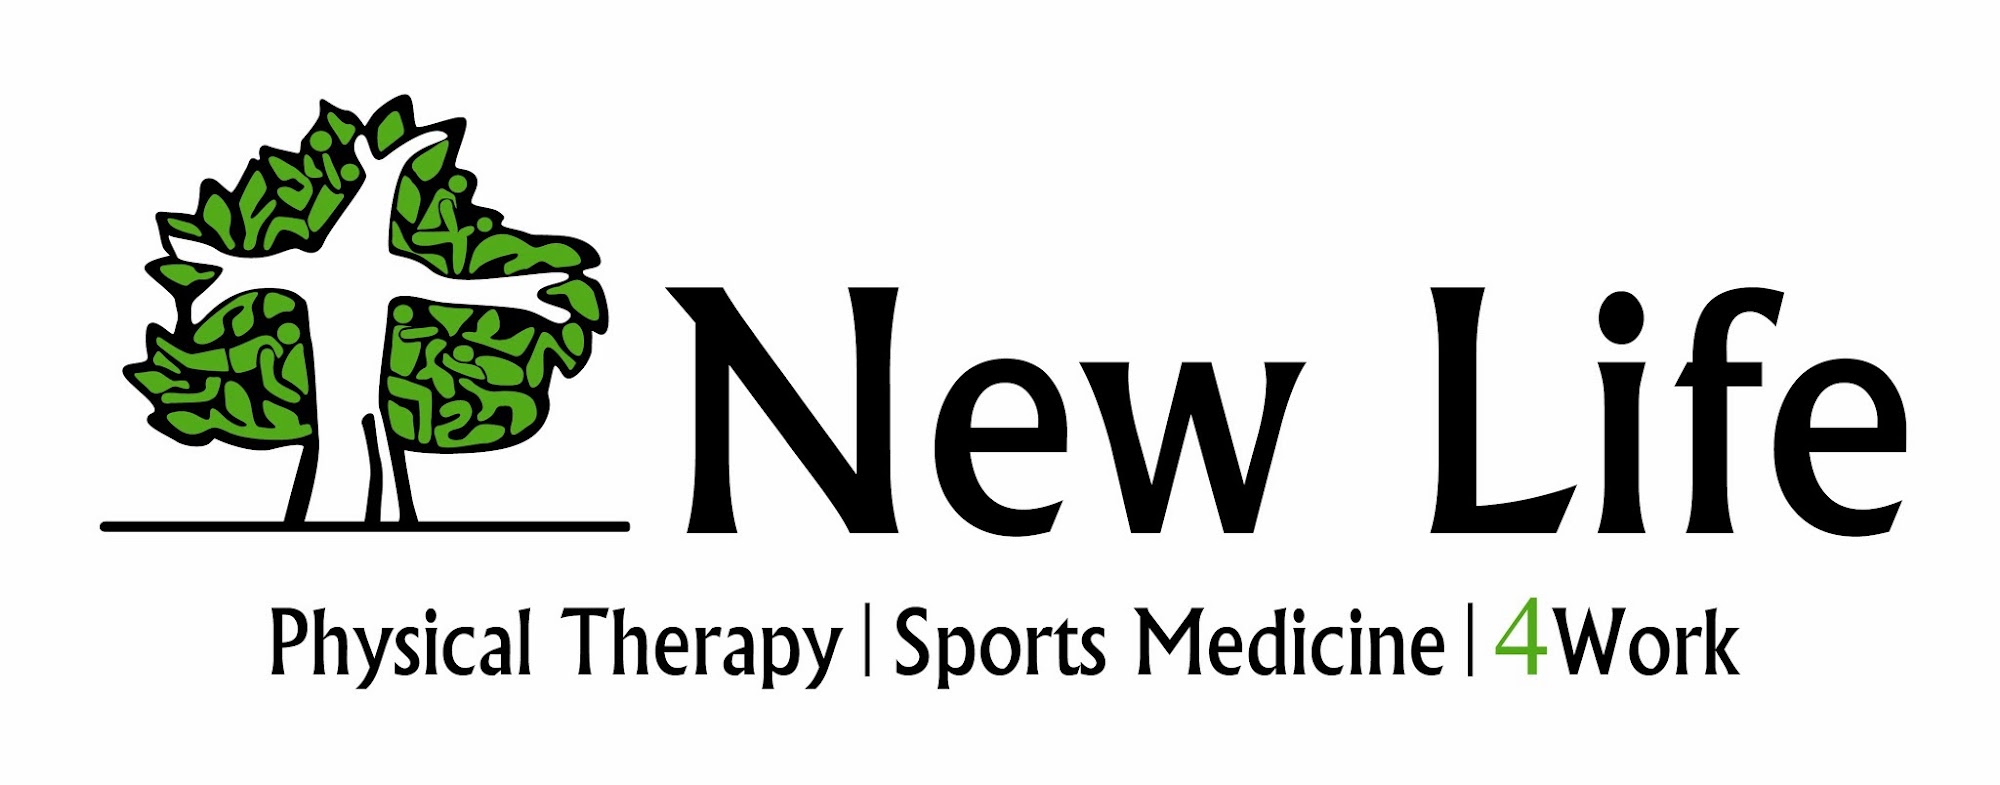 New Life Physical Therapy 2639 New Pinery Rd # 2, Portage Wisconsin 53901